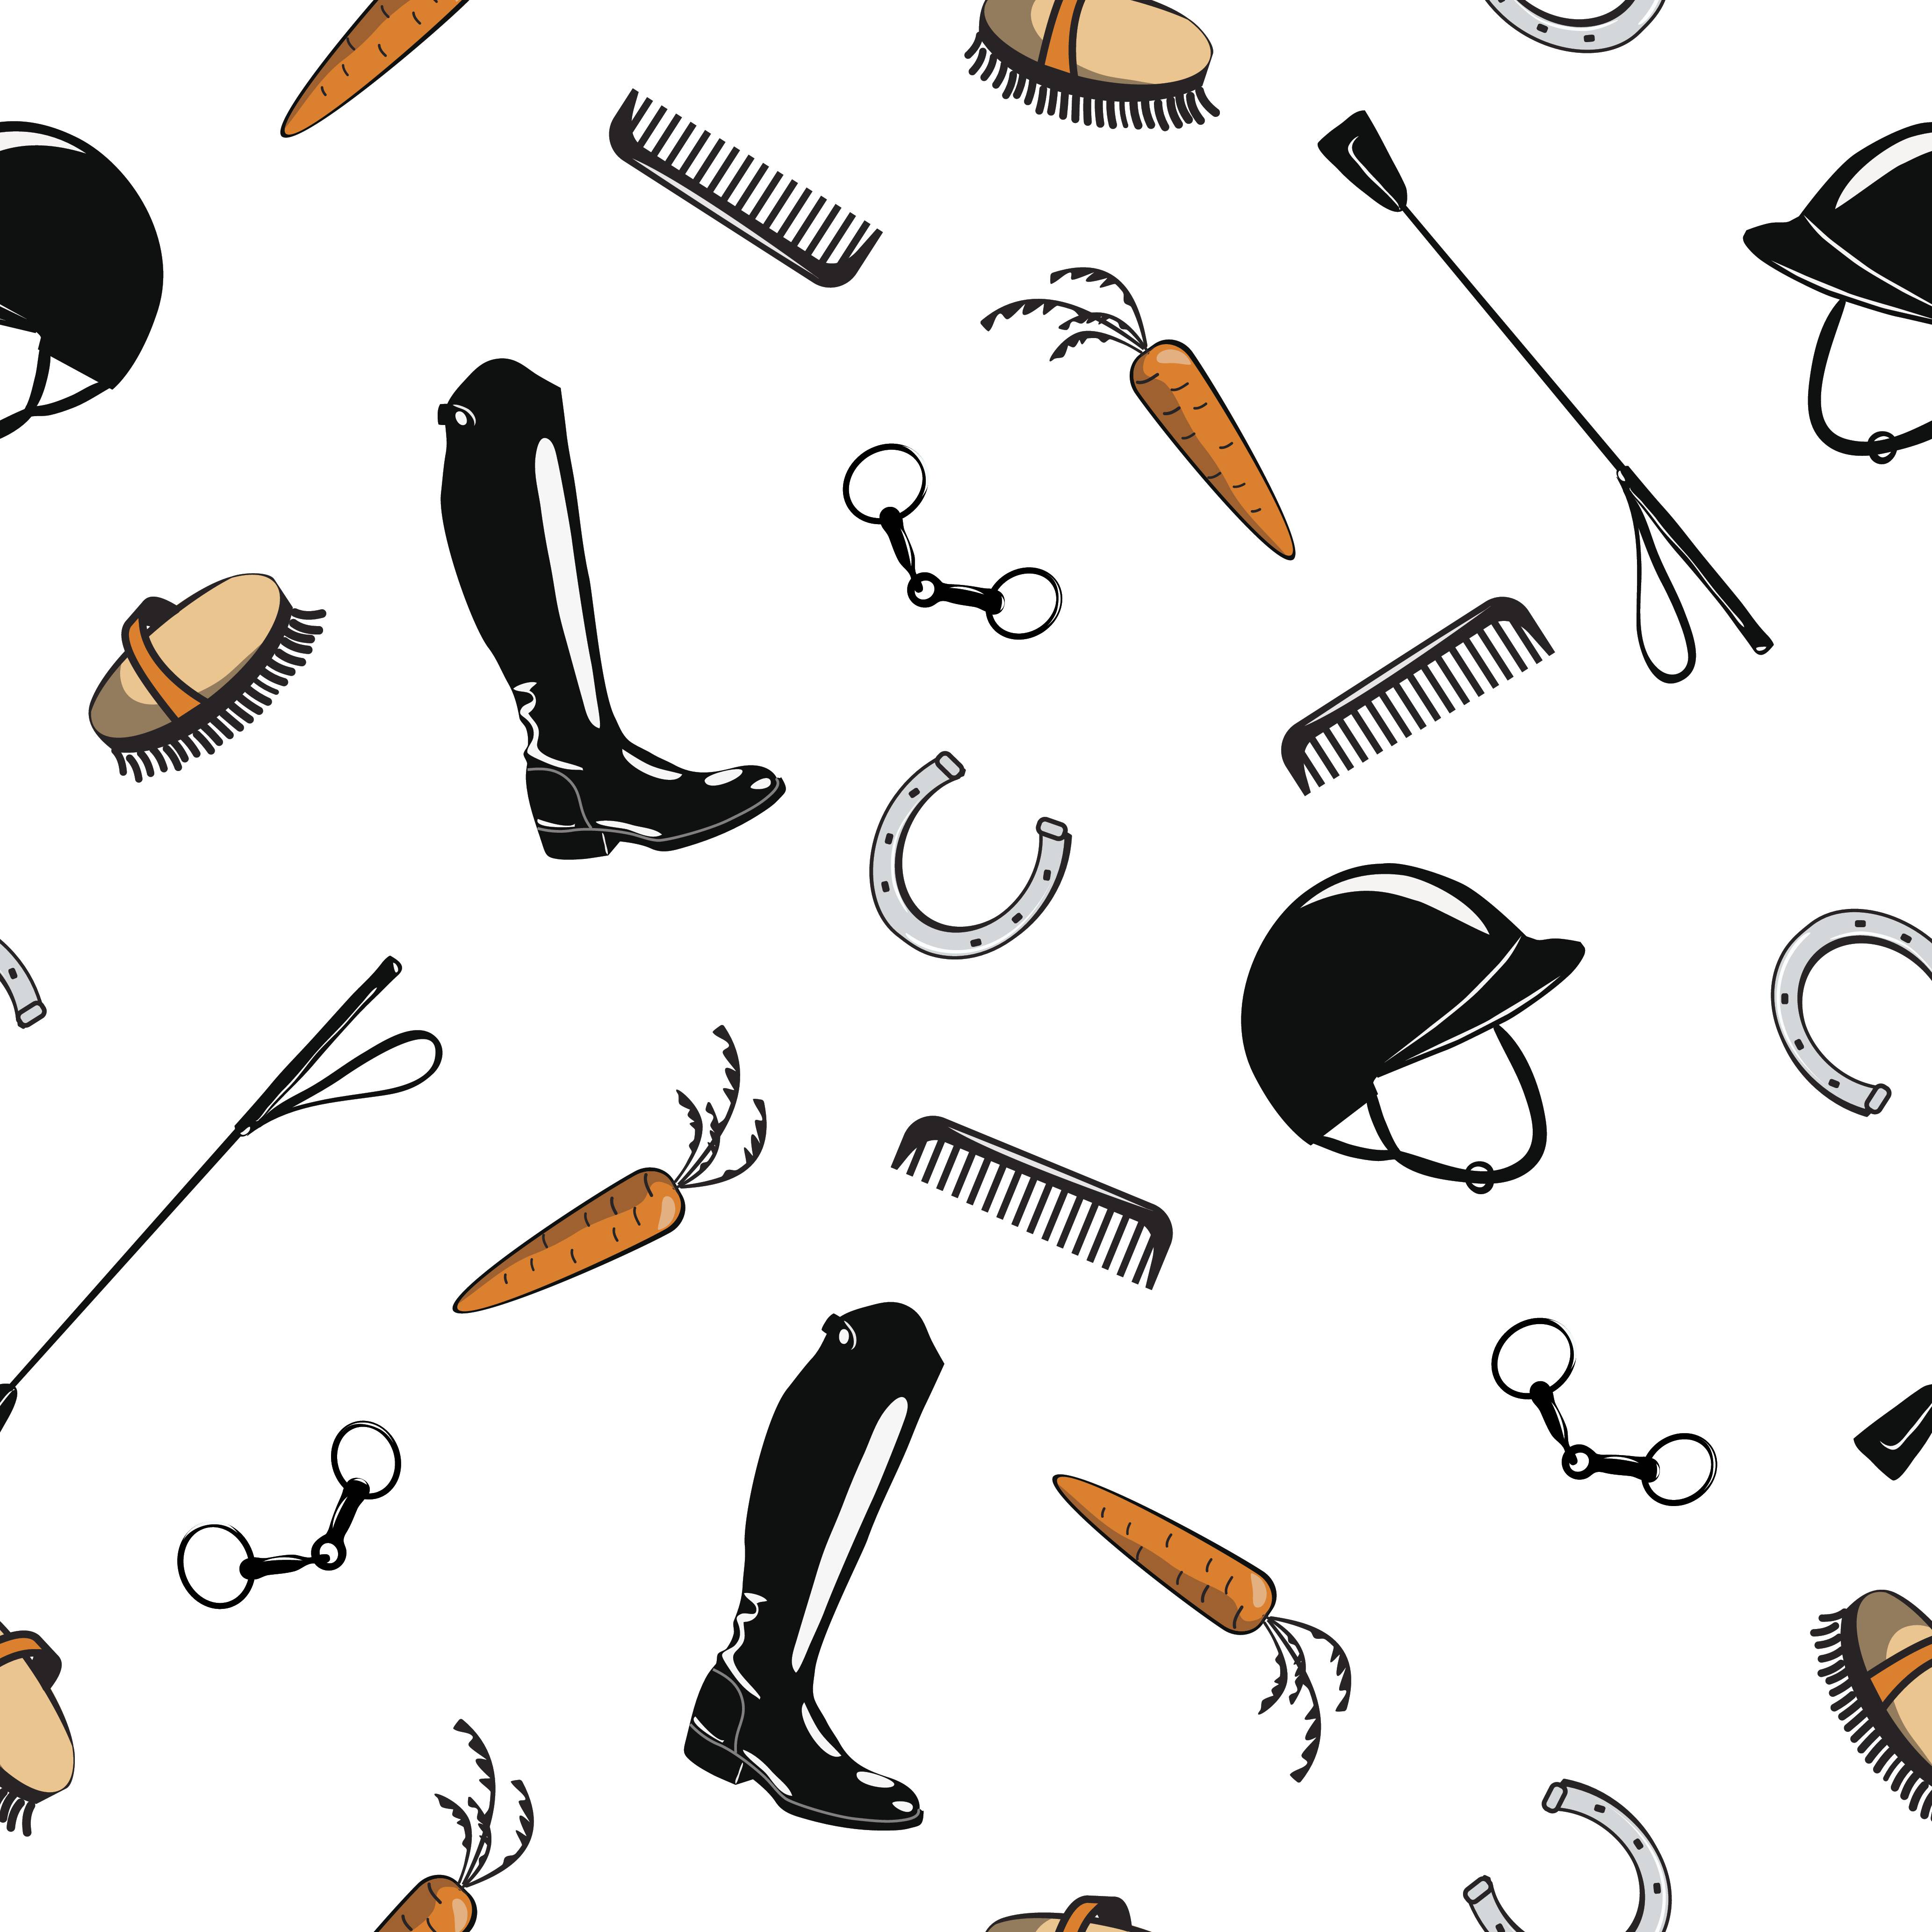 A graphic of horse riding equipment